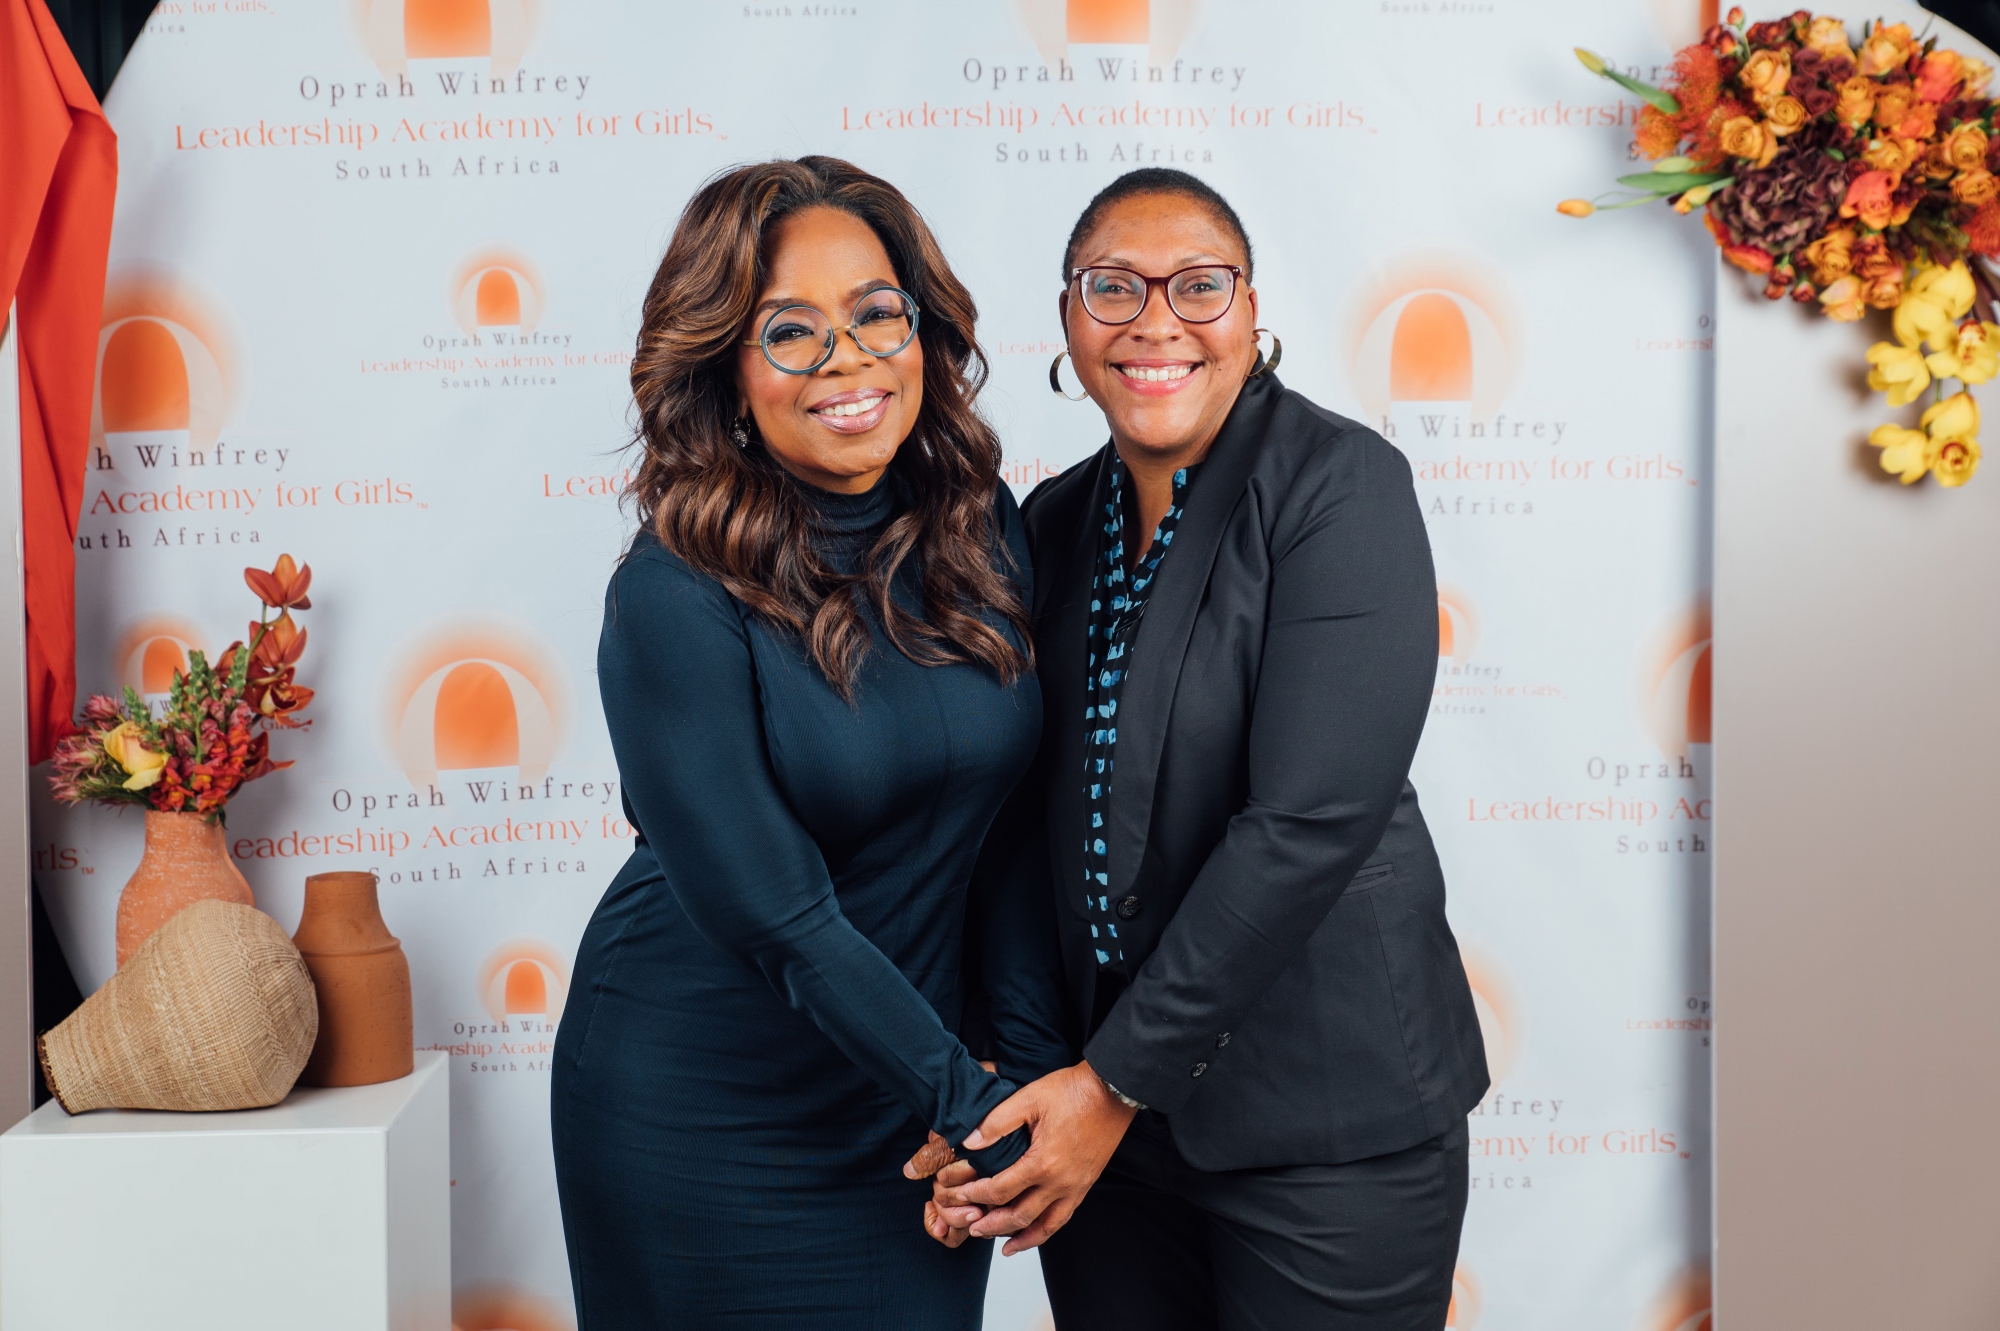 Oprah Winfrey stands in a dark blue dress, clasping hands with Penn GSE Assistant Adjunct Professor Charlotte Jacobs on the right, who is wearing a black suit over a black-and-blue button-down shirt. The two stand in front of a backdrop of the Oprah Winfrey Leadership Academy for Girls logo behind them.